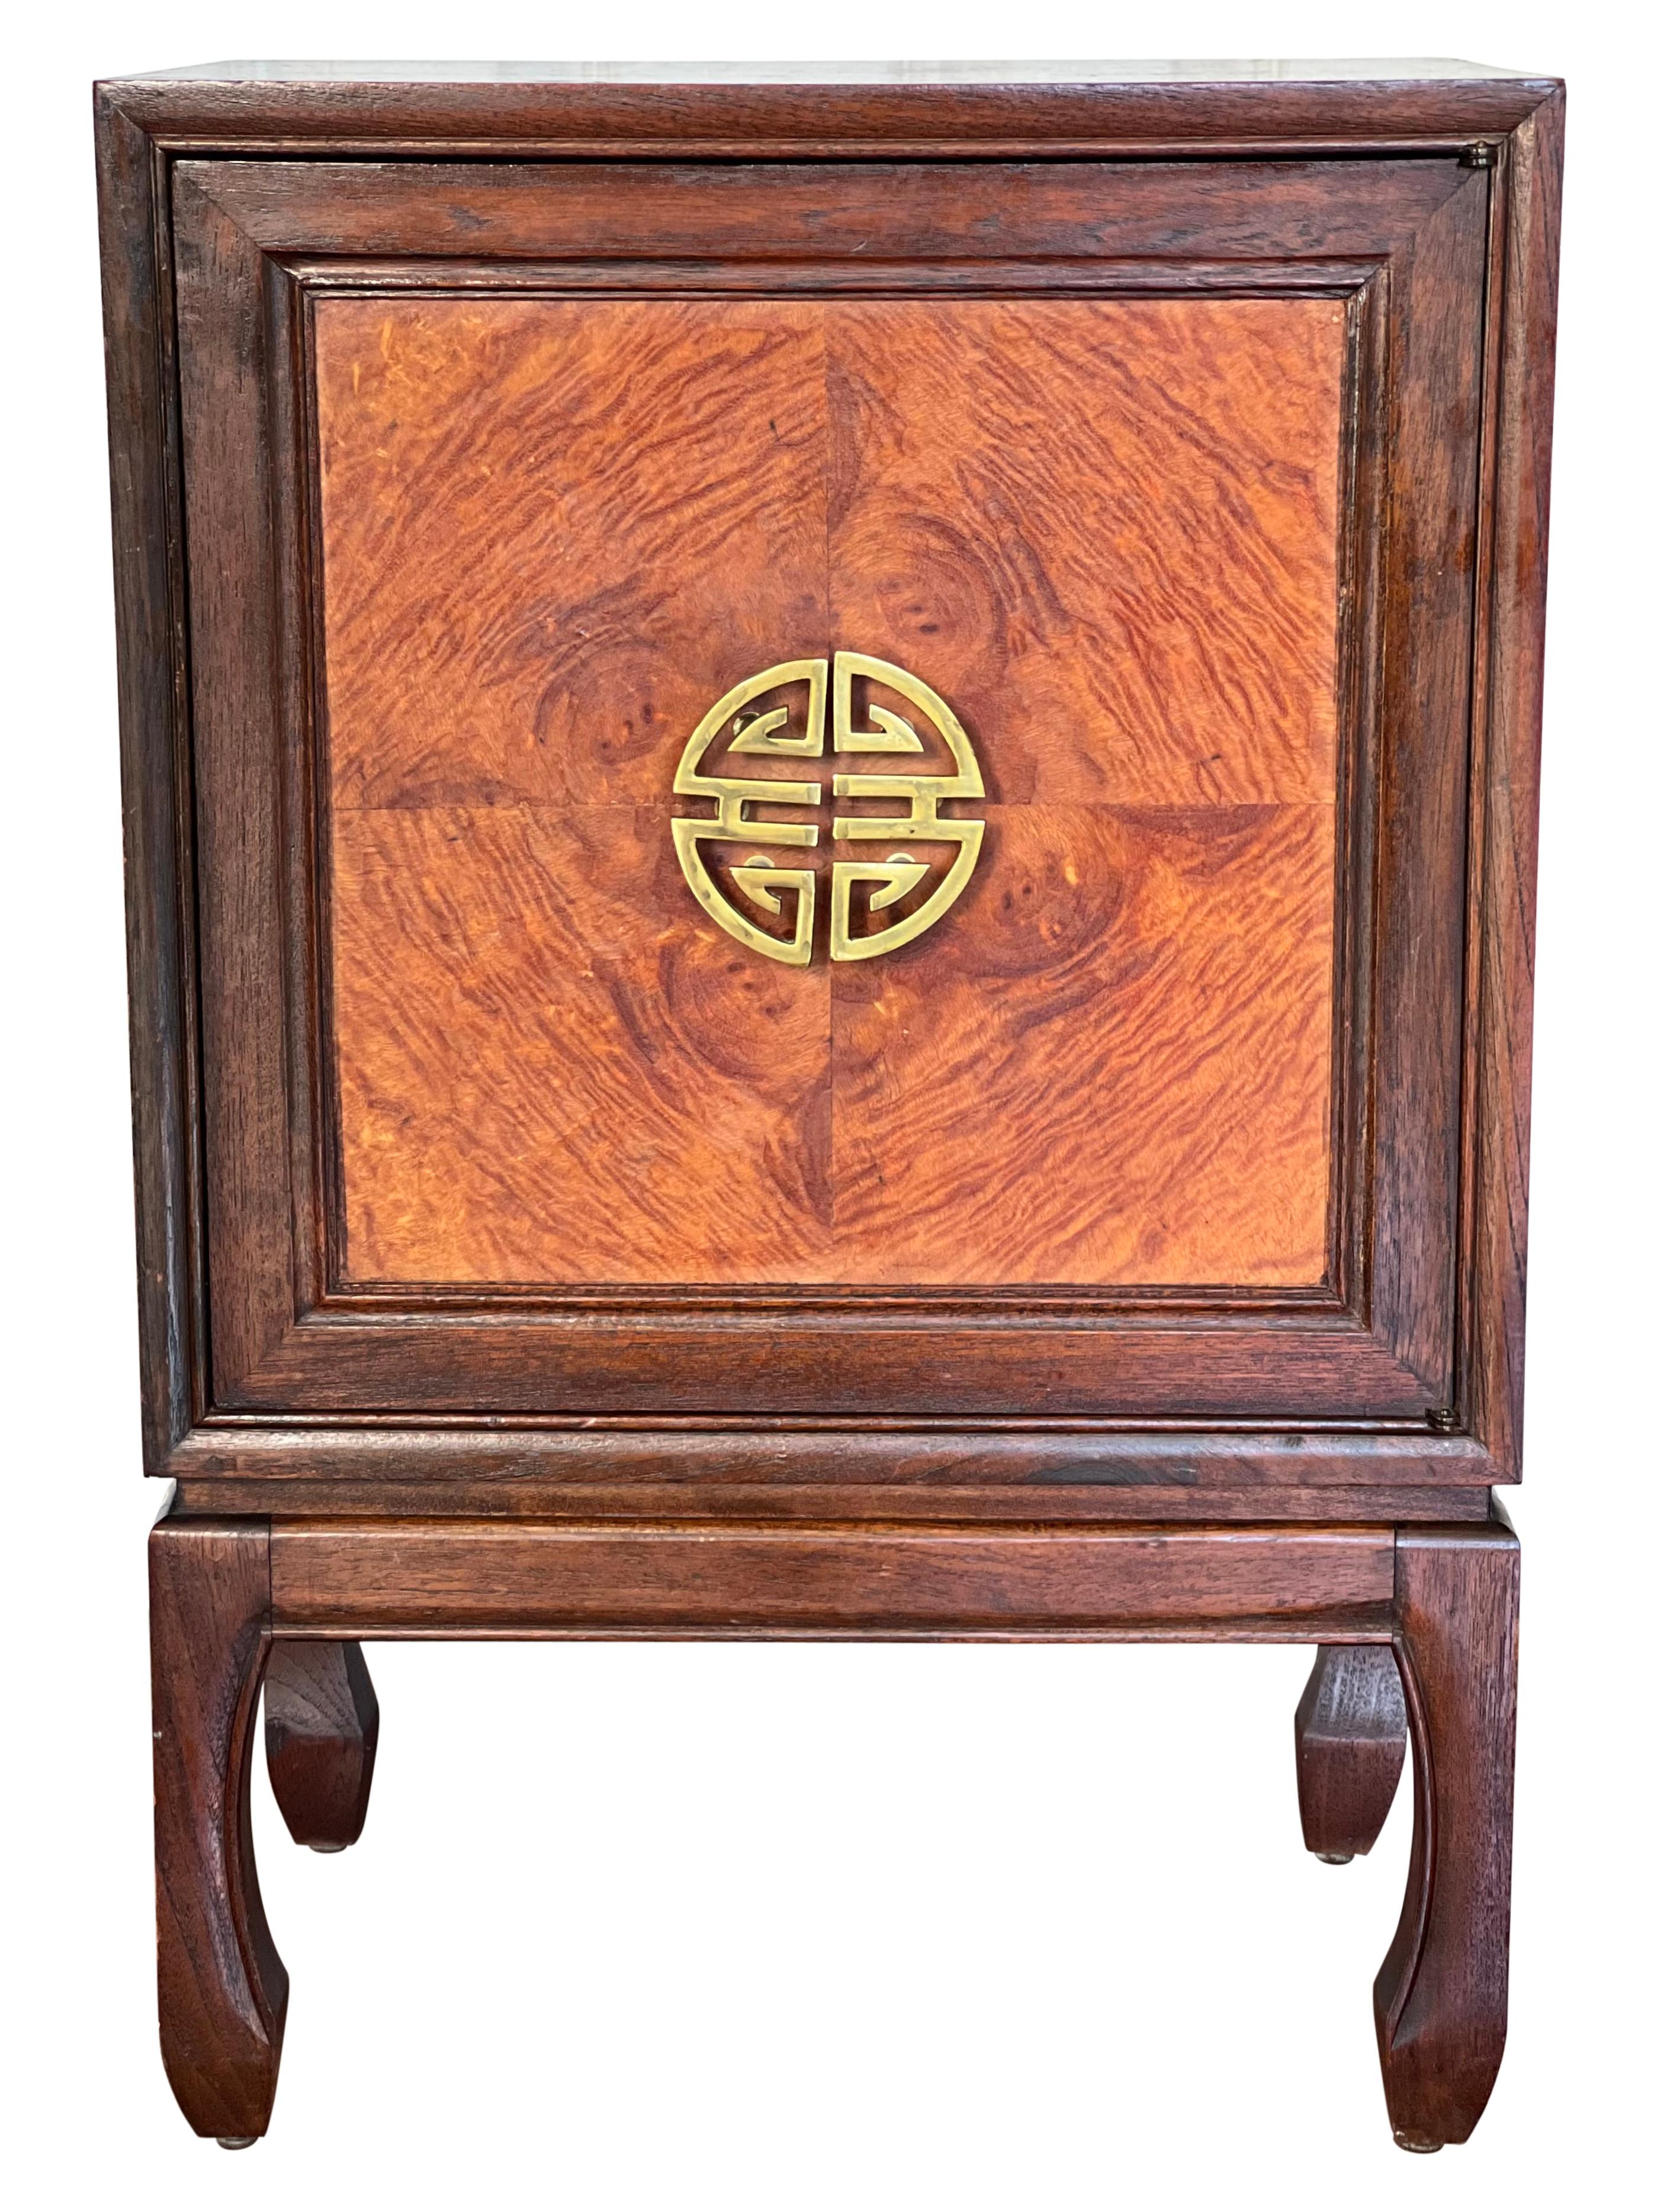 Early 20th Century Asian Style Petite Pipe and Tobacco Cabinet In Good Condition For Sale In Doylestown, PA